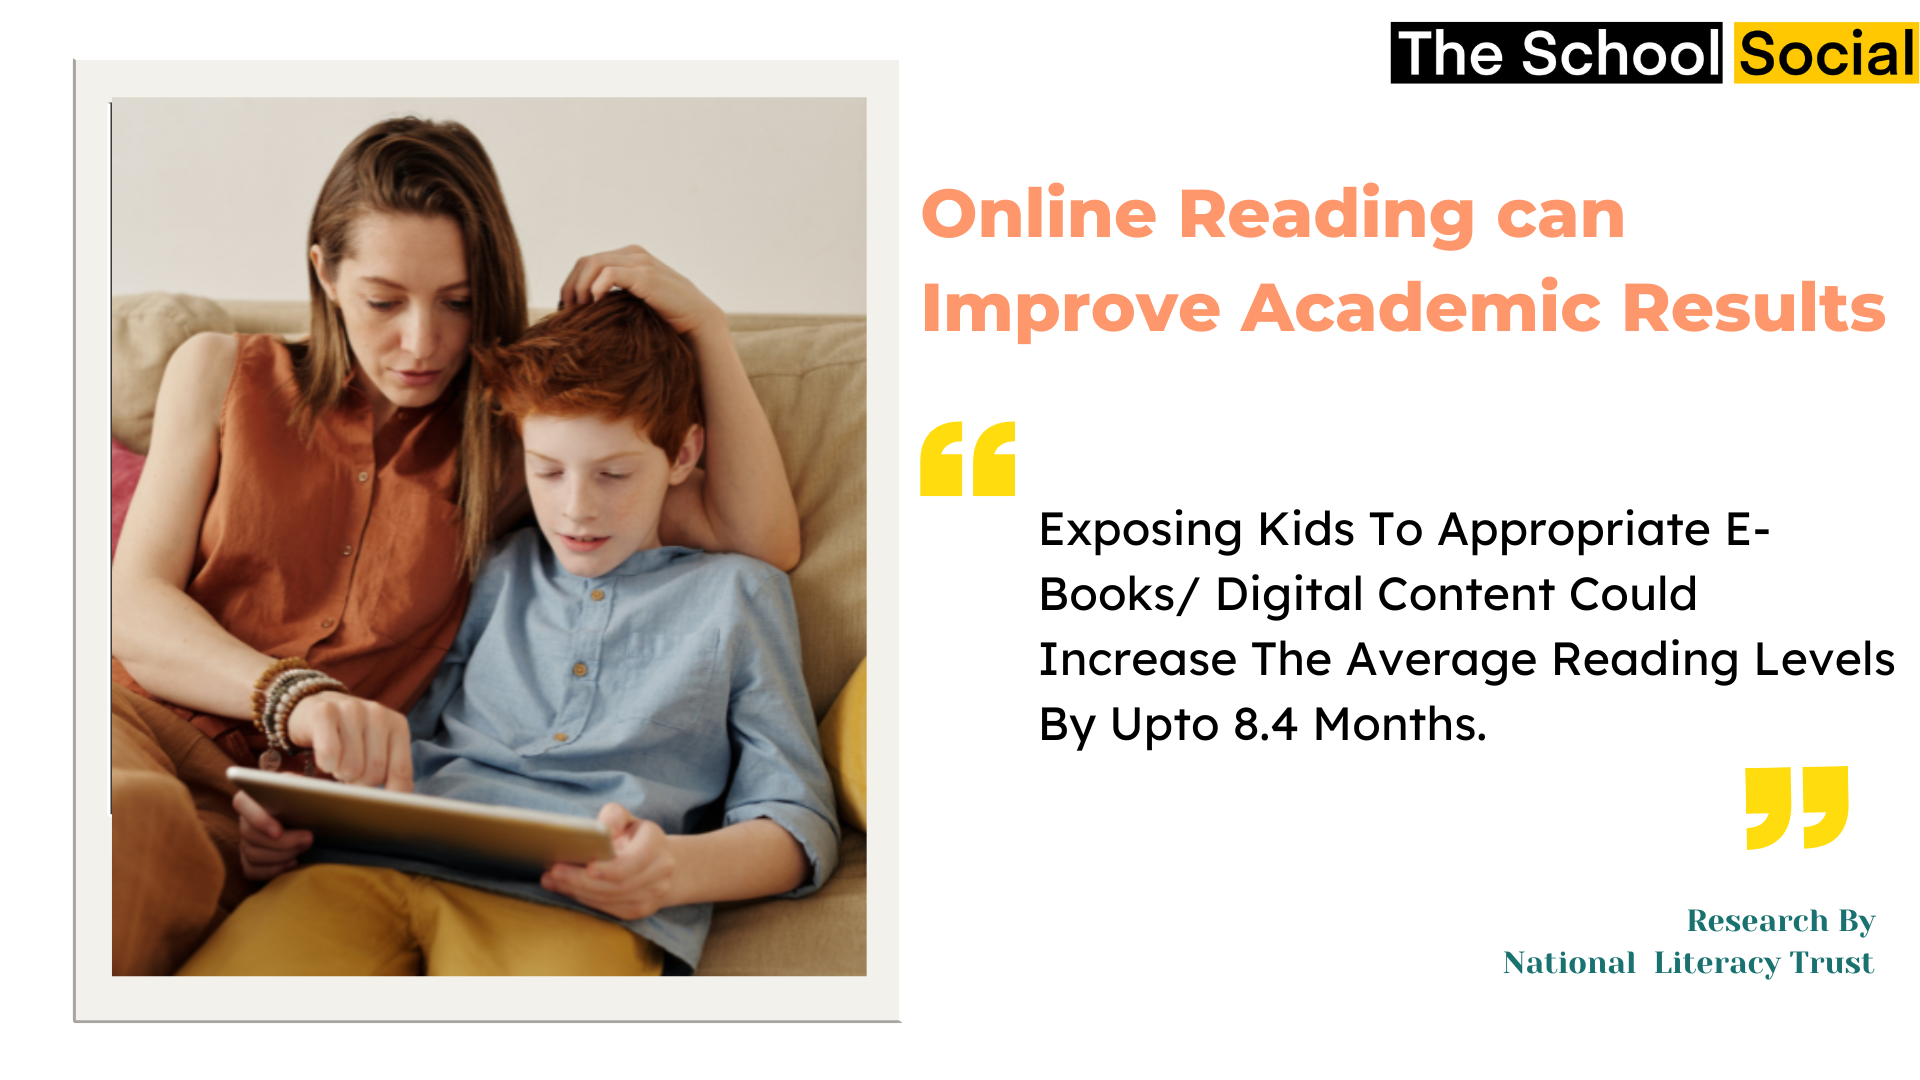 Online Reading can Improve Academic Results